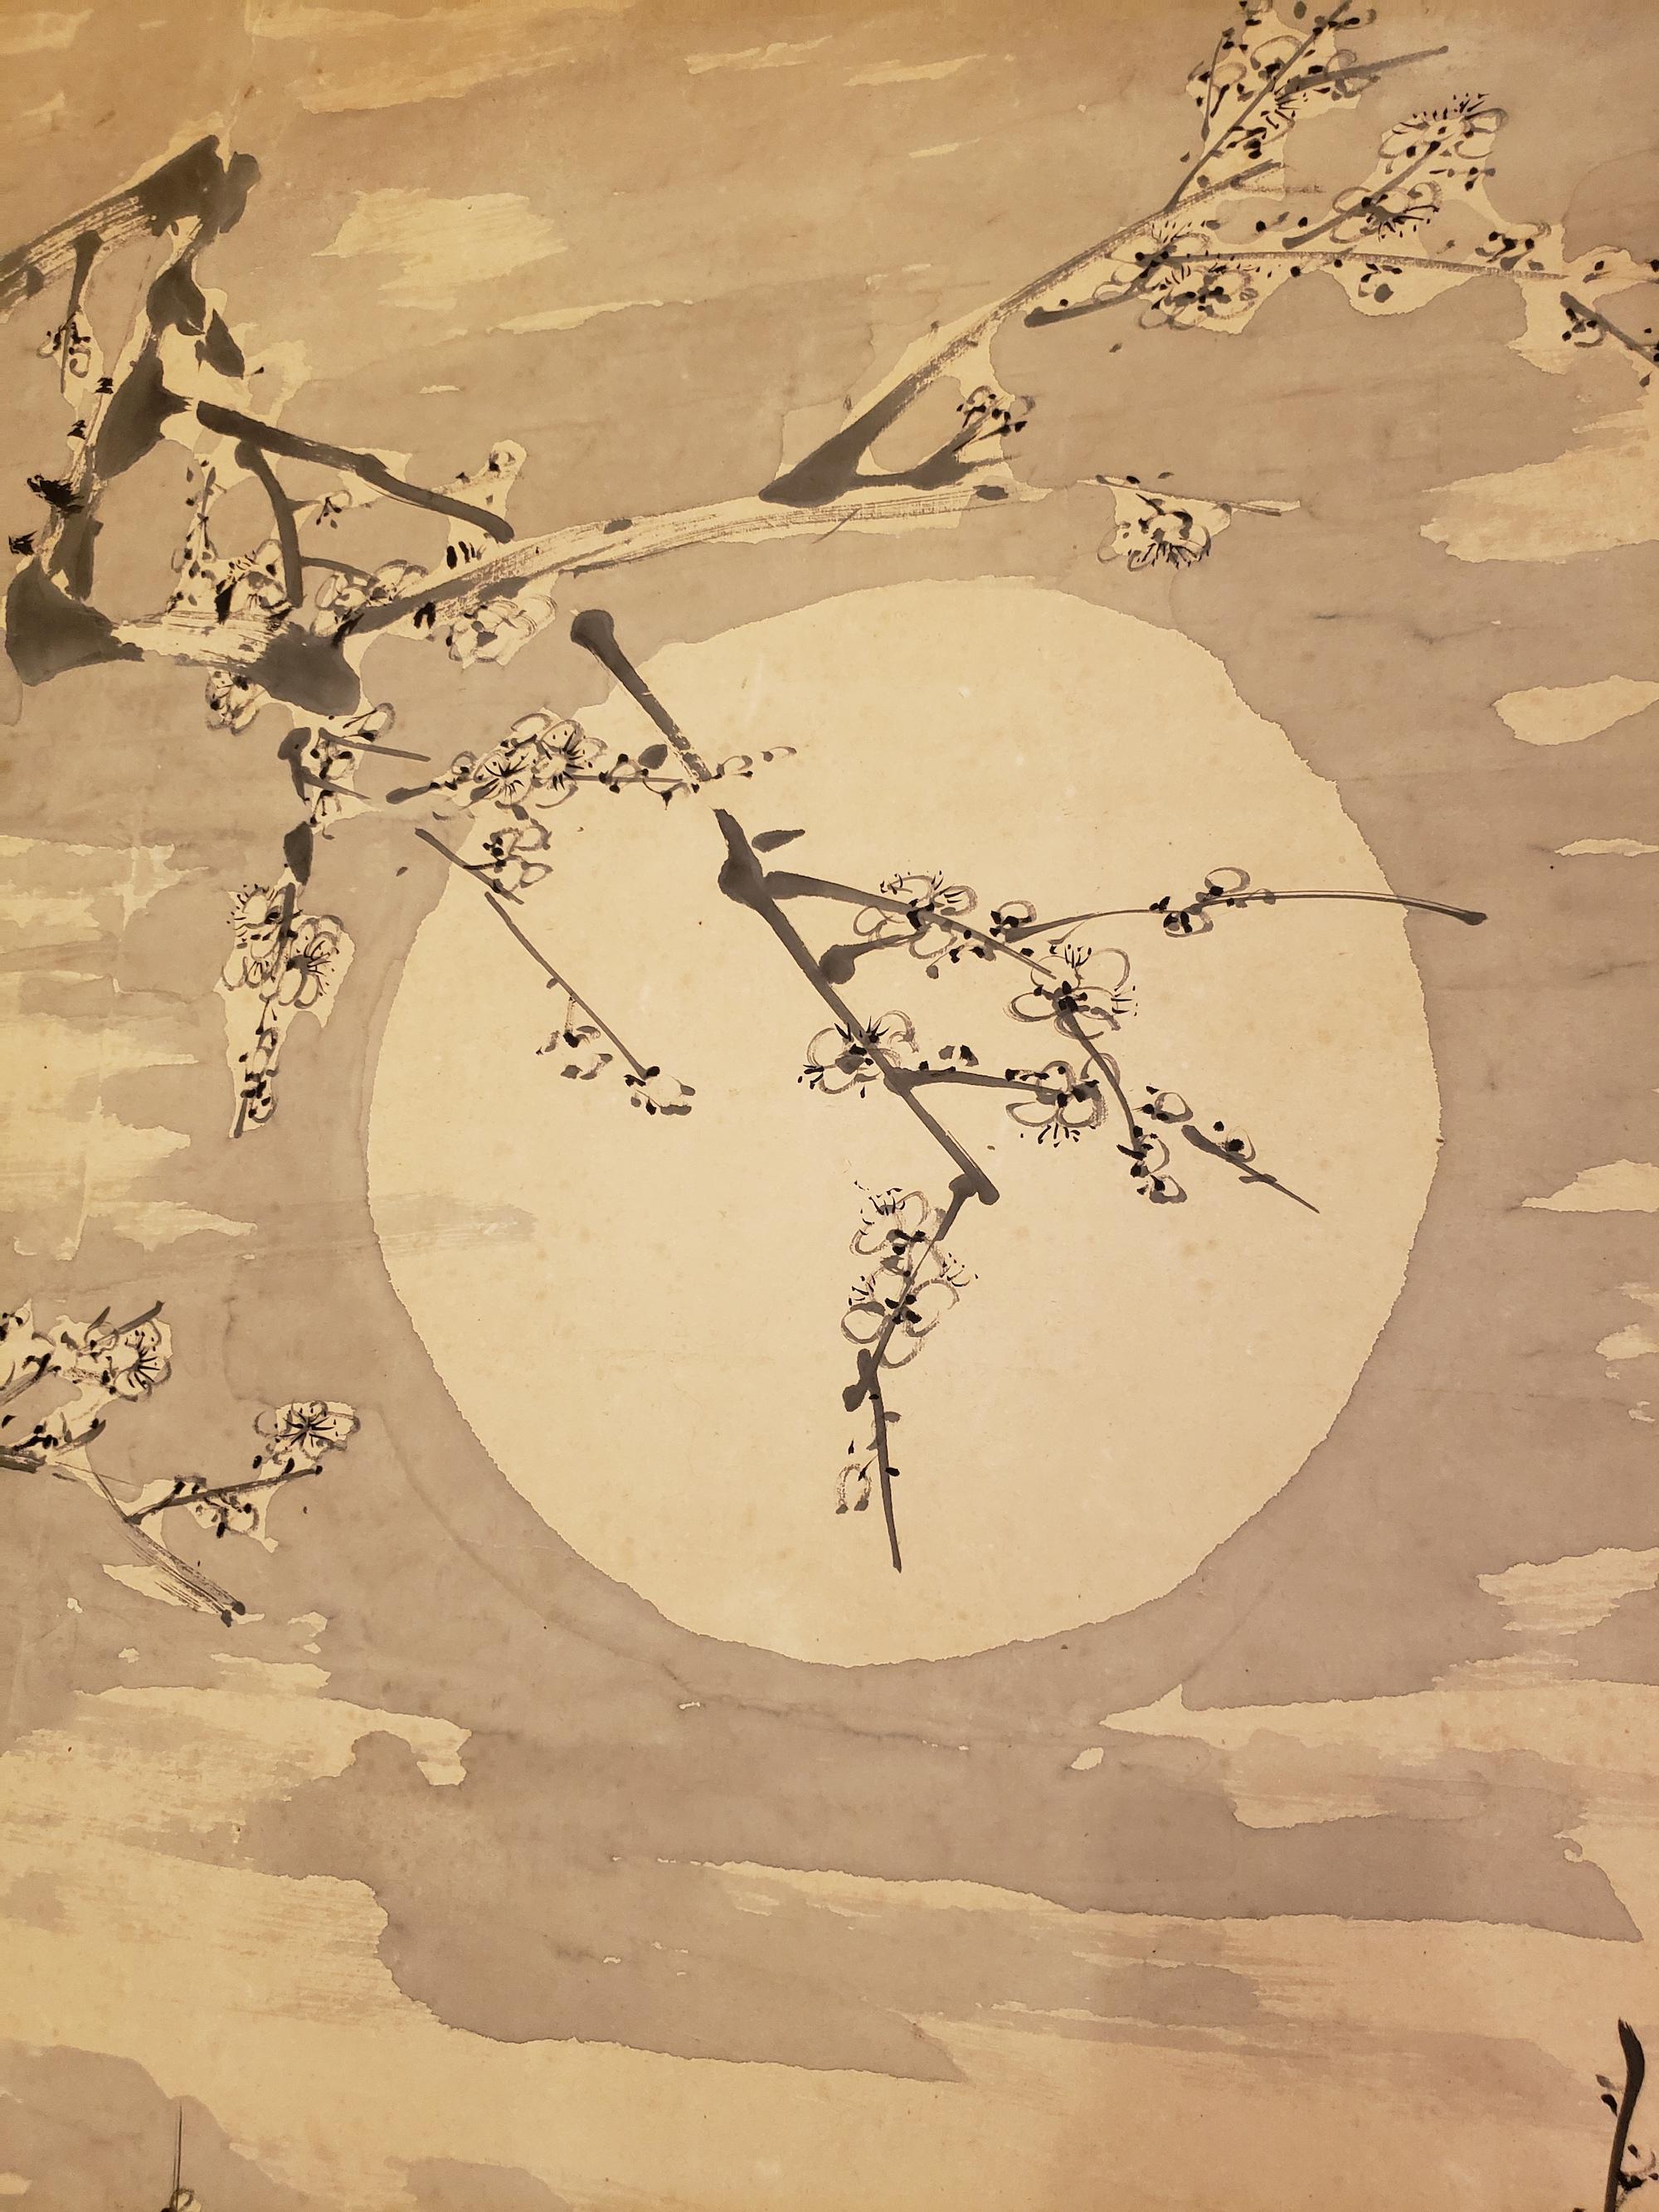 Meiji period (1868-1912) ink painting of plum branches in bloom against a full moon with calligraphy. The calligraphy is a poem about winter. Signature reads: Matsuura Ryosai, Dated: 1890. Ink on paper, framed.